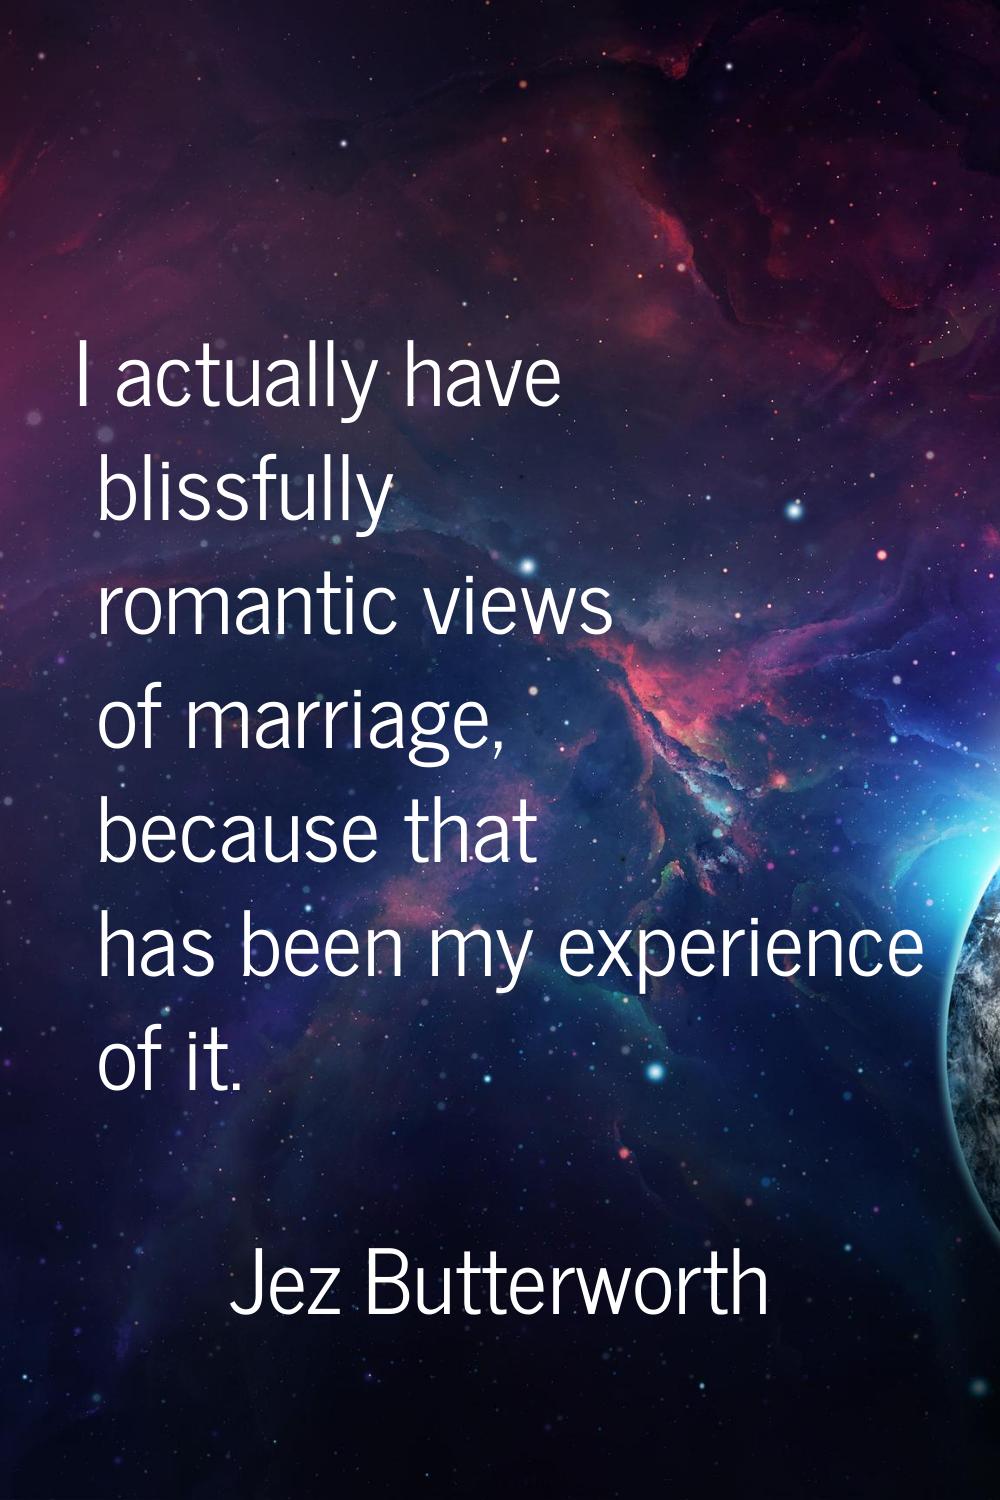 I actually have blissfully romantic views of marriage, because that has been my experience of it.